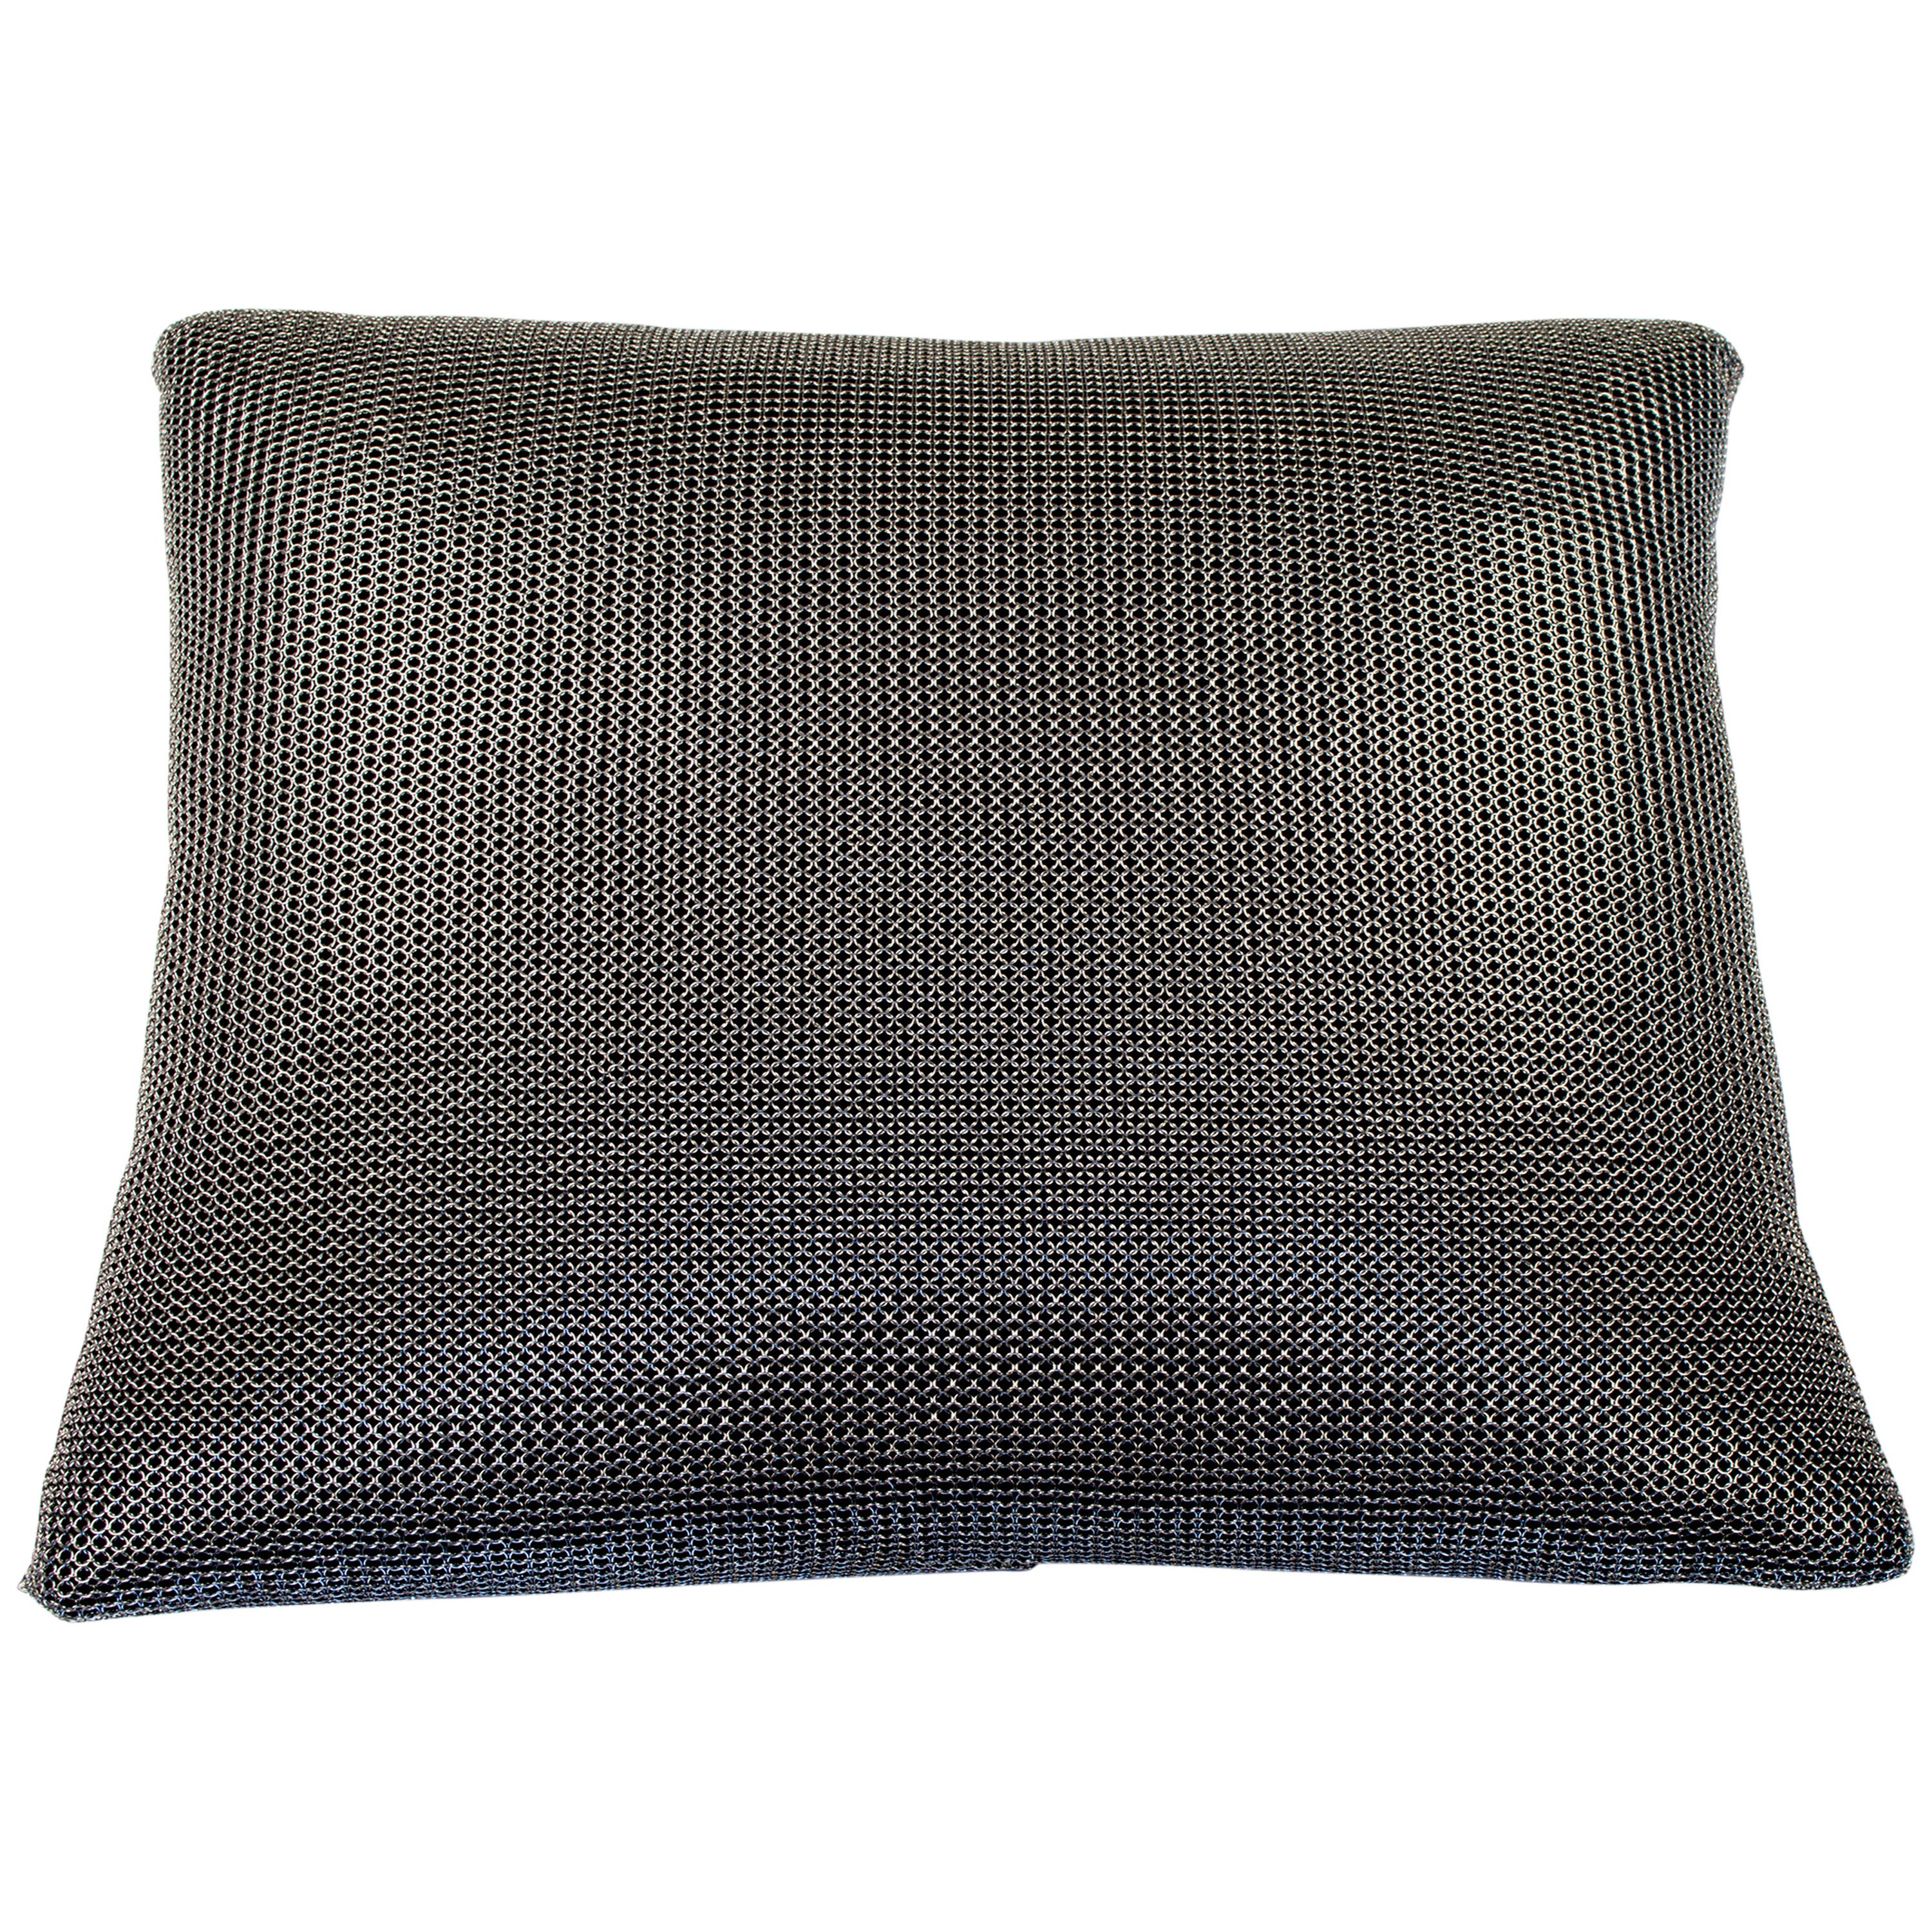 Chain Mail Pillow